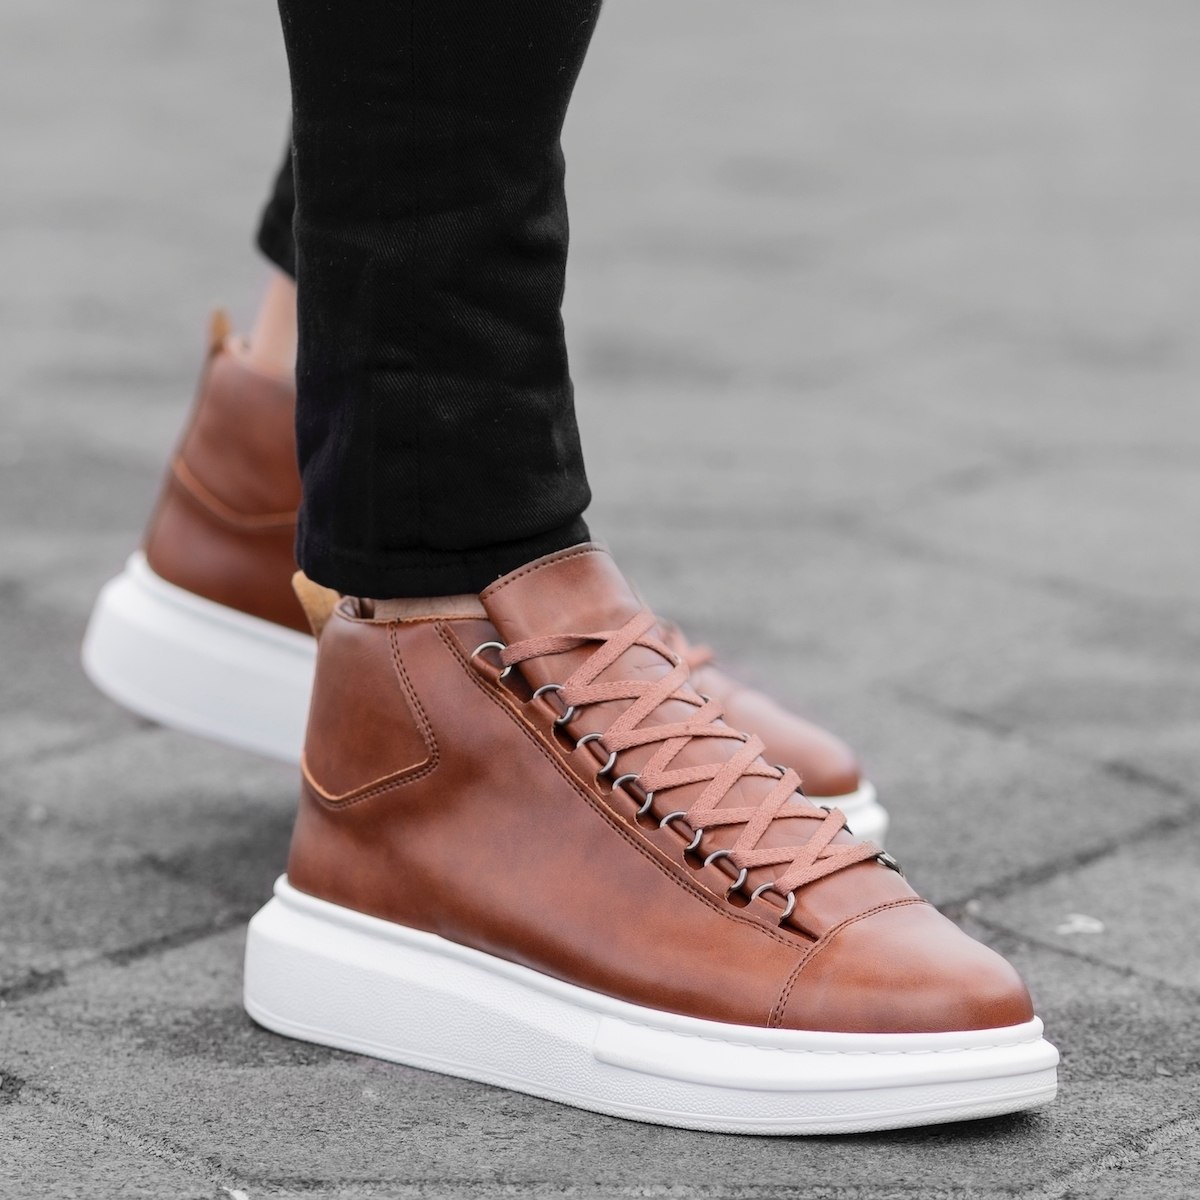 Hype Sole Mox High Top Sneakers in Taupe - 1